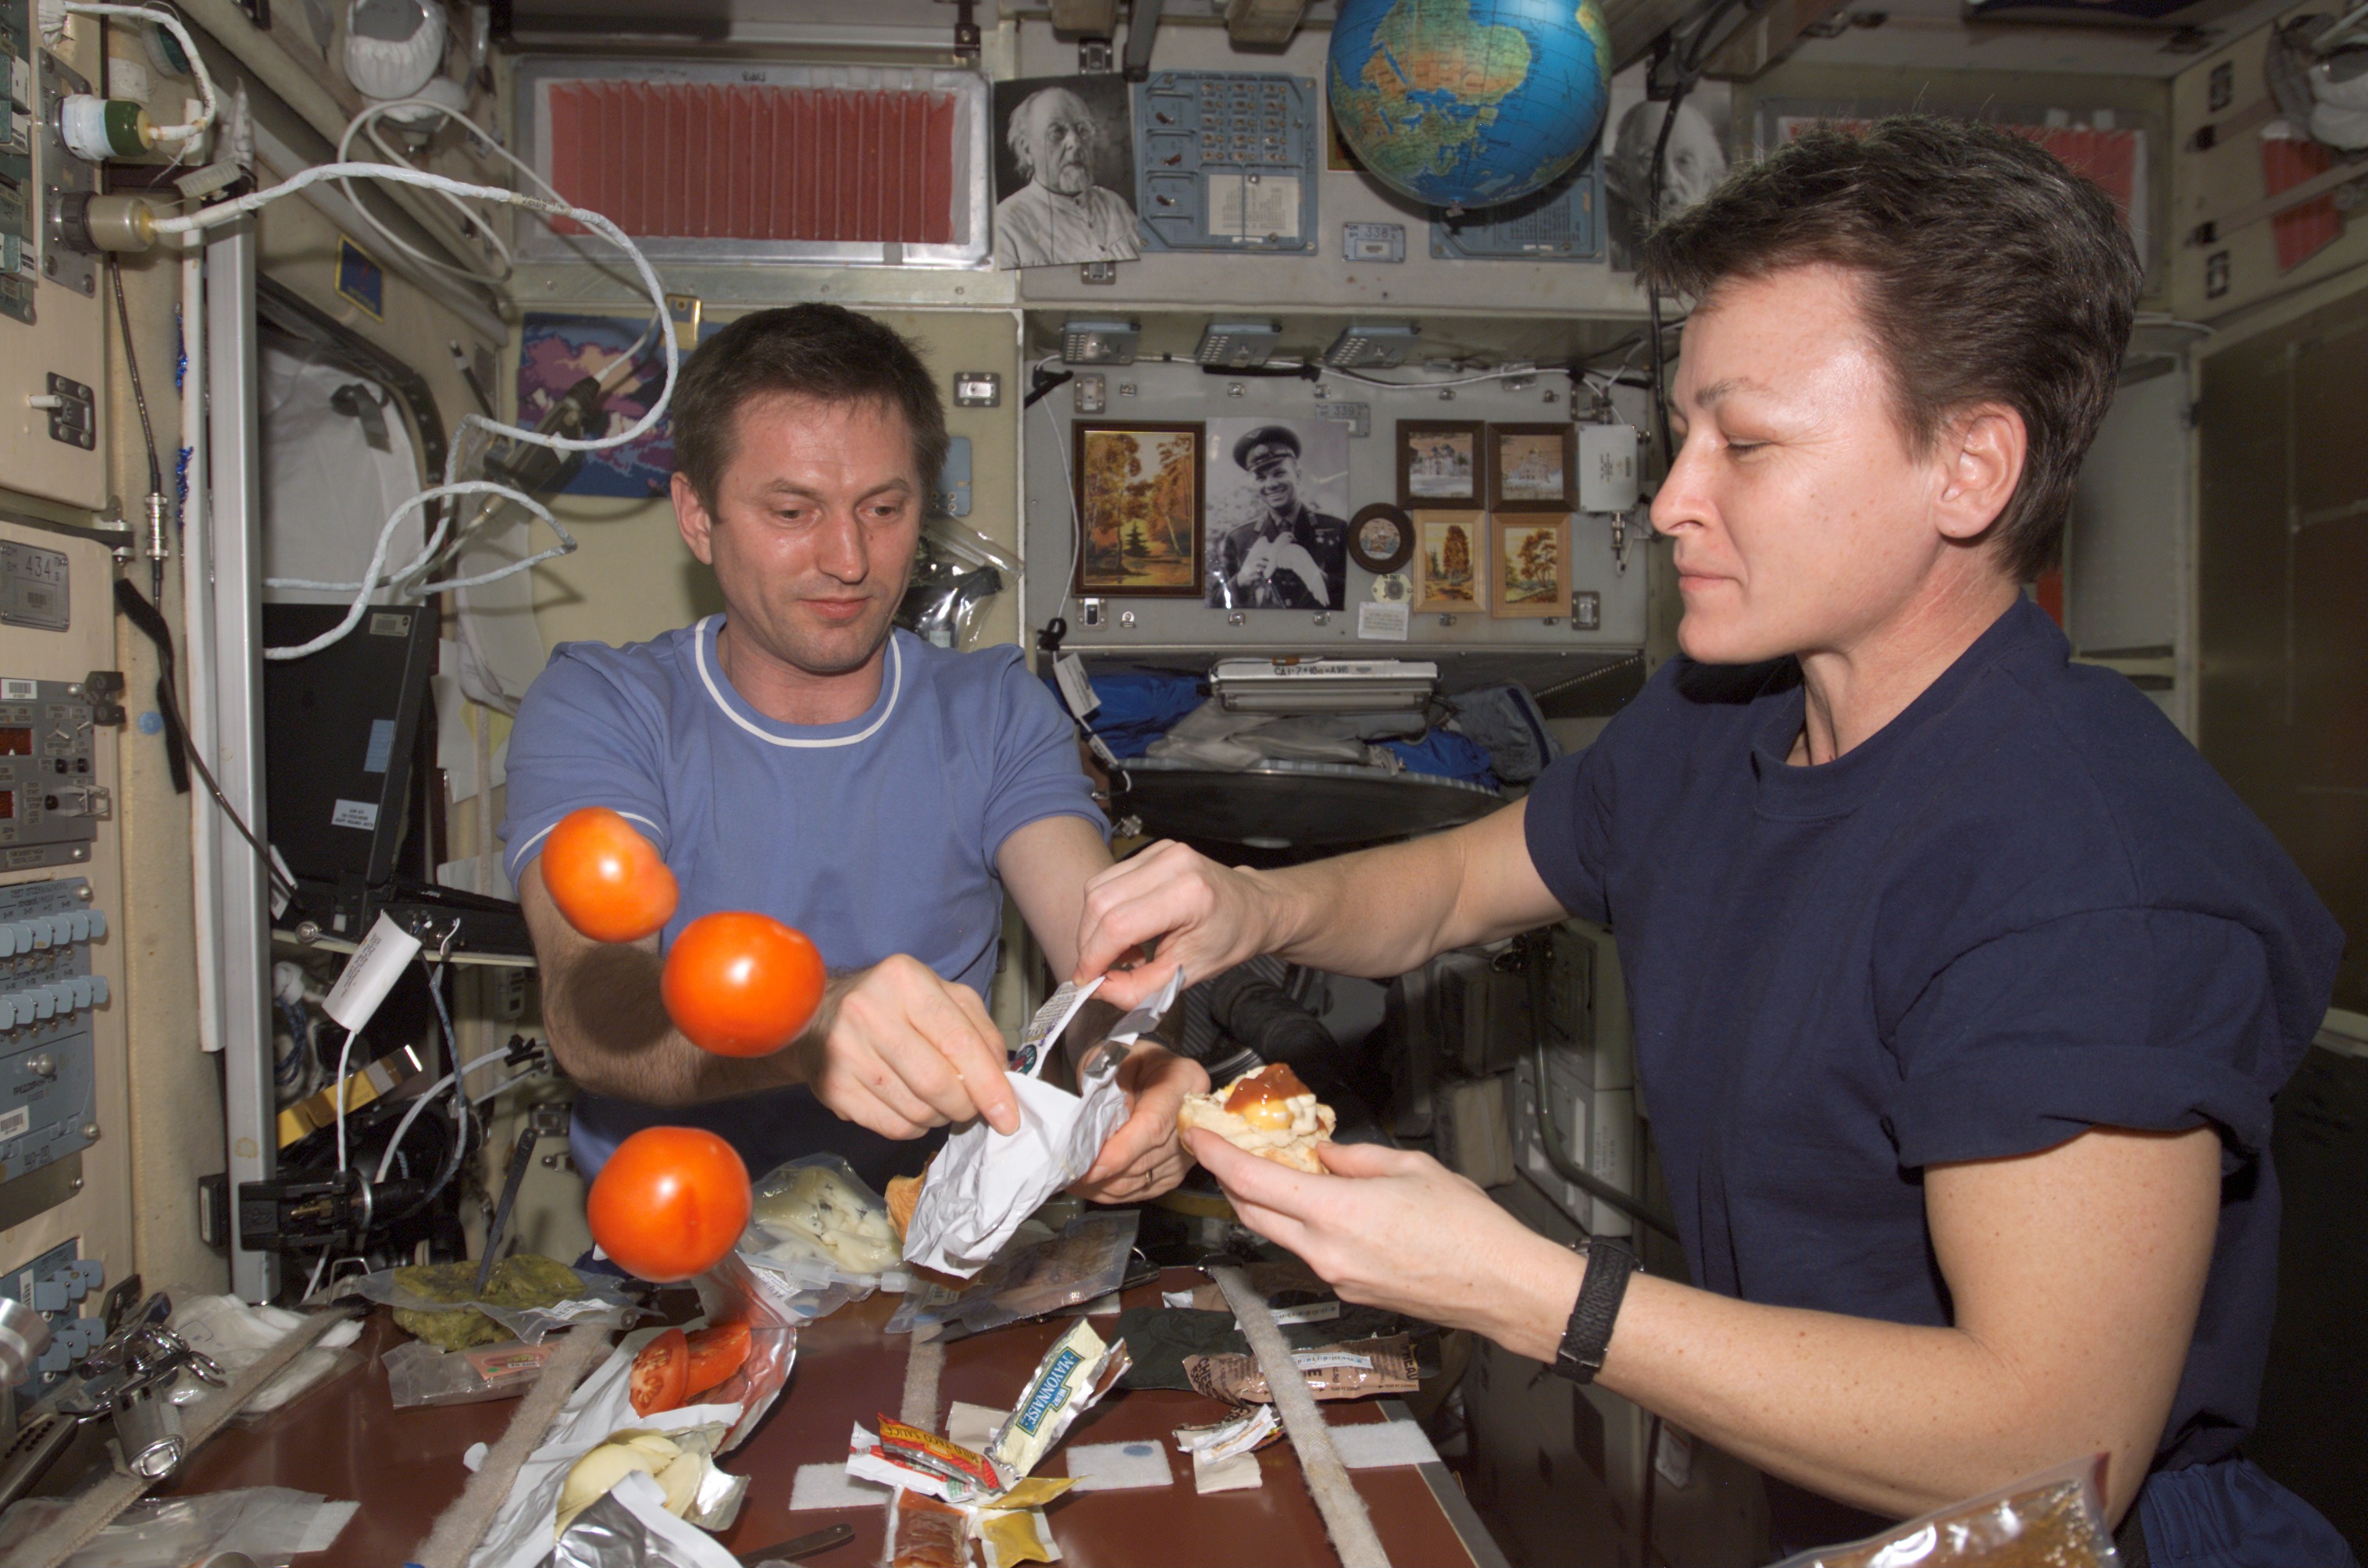 ISS-05 Peggy Whitson and Sergei Treshchyov share a meal in the Zvezda Module